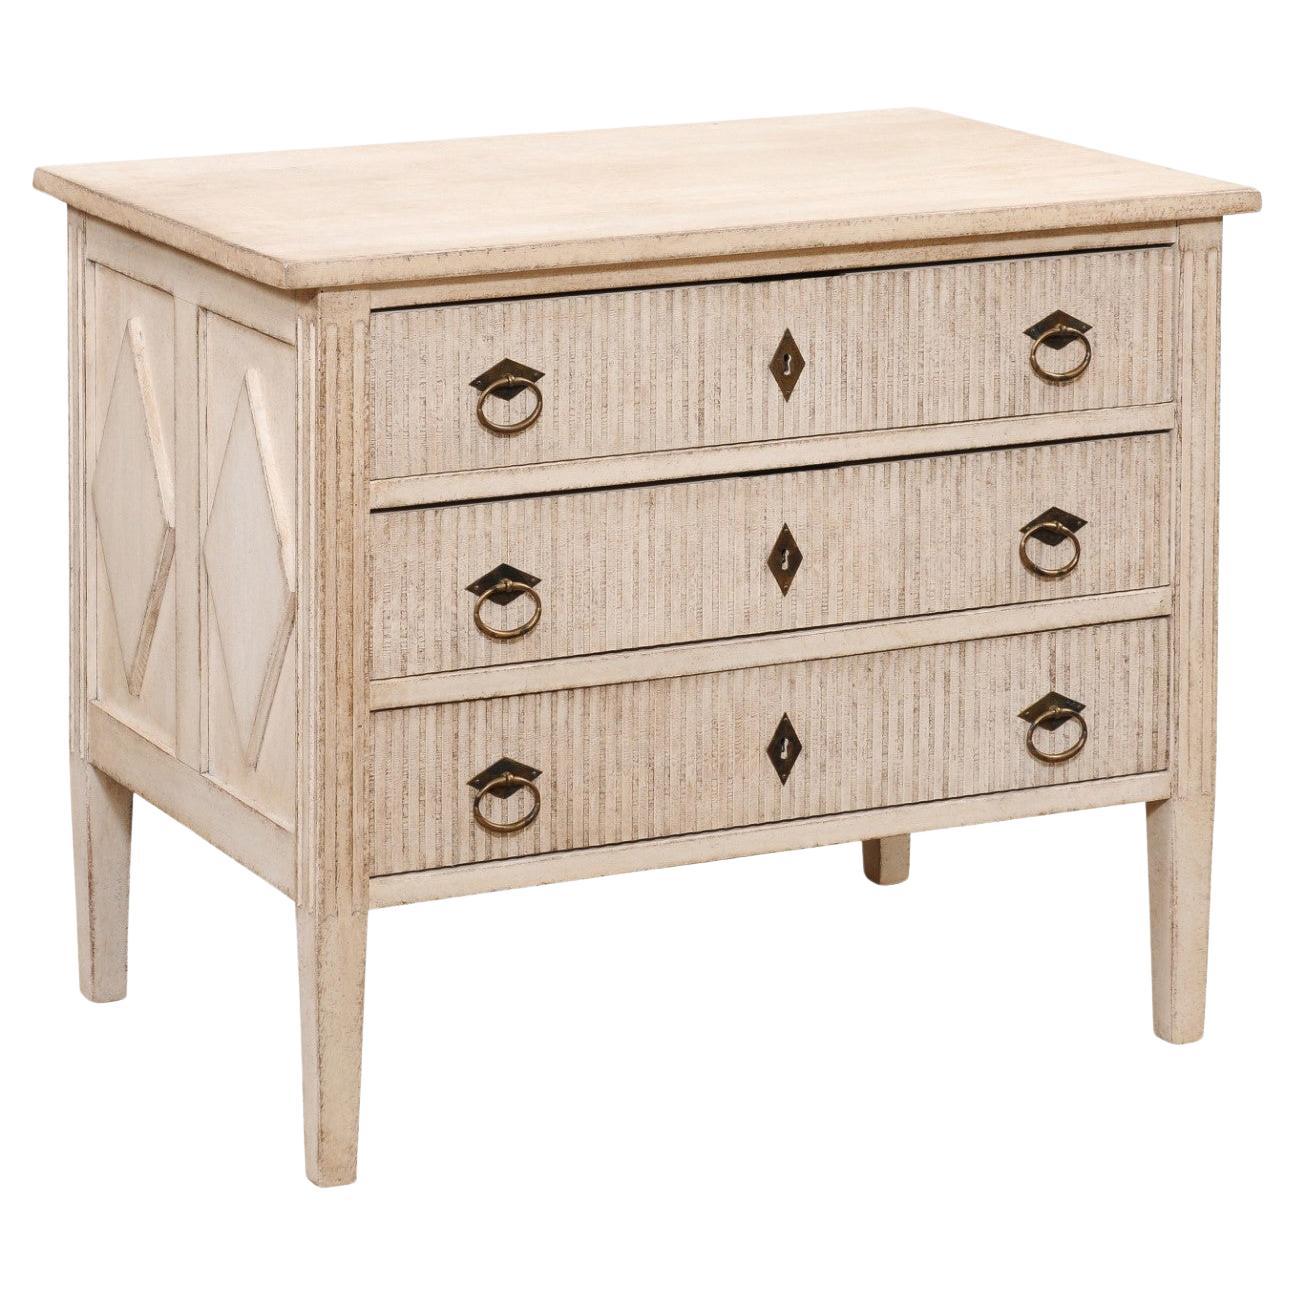 Gustavian Style Three-Drawer Chest with Carved Reeded Motifs, 19th Century For Sale